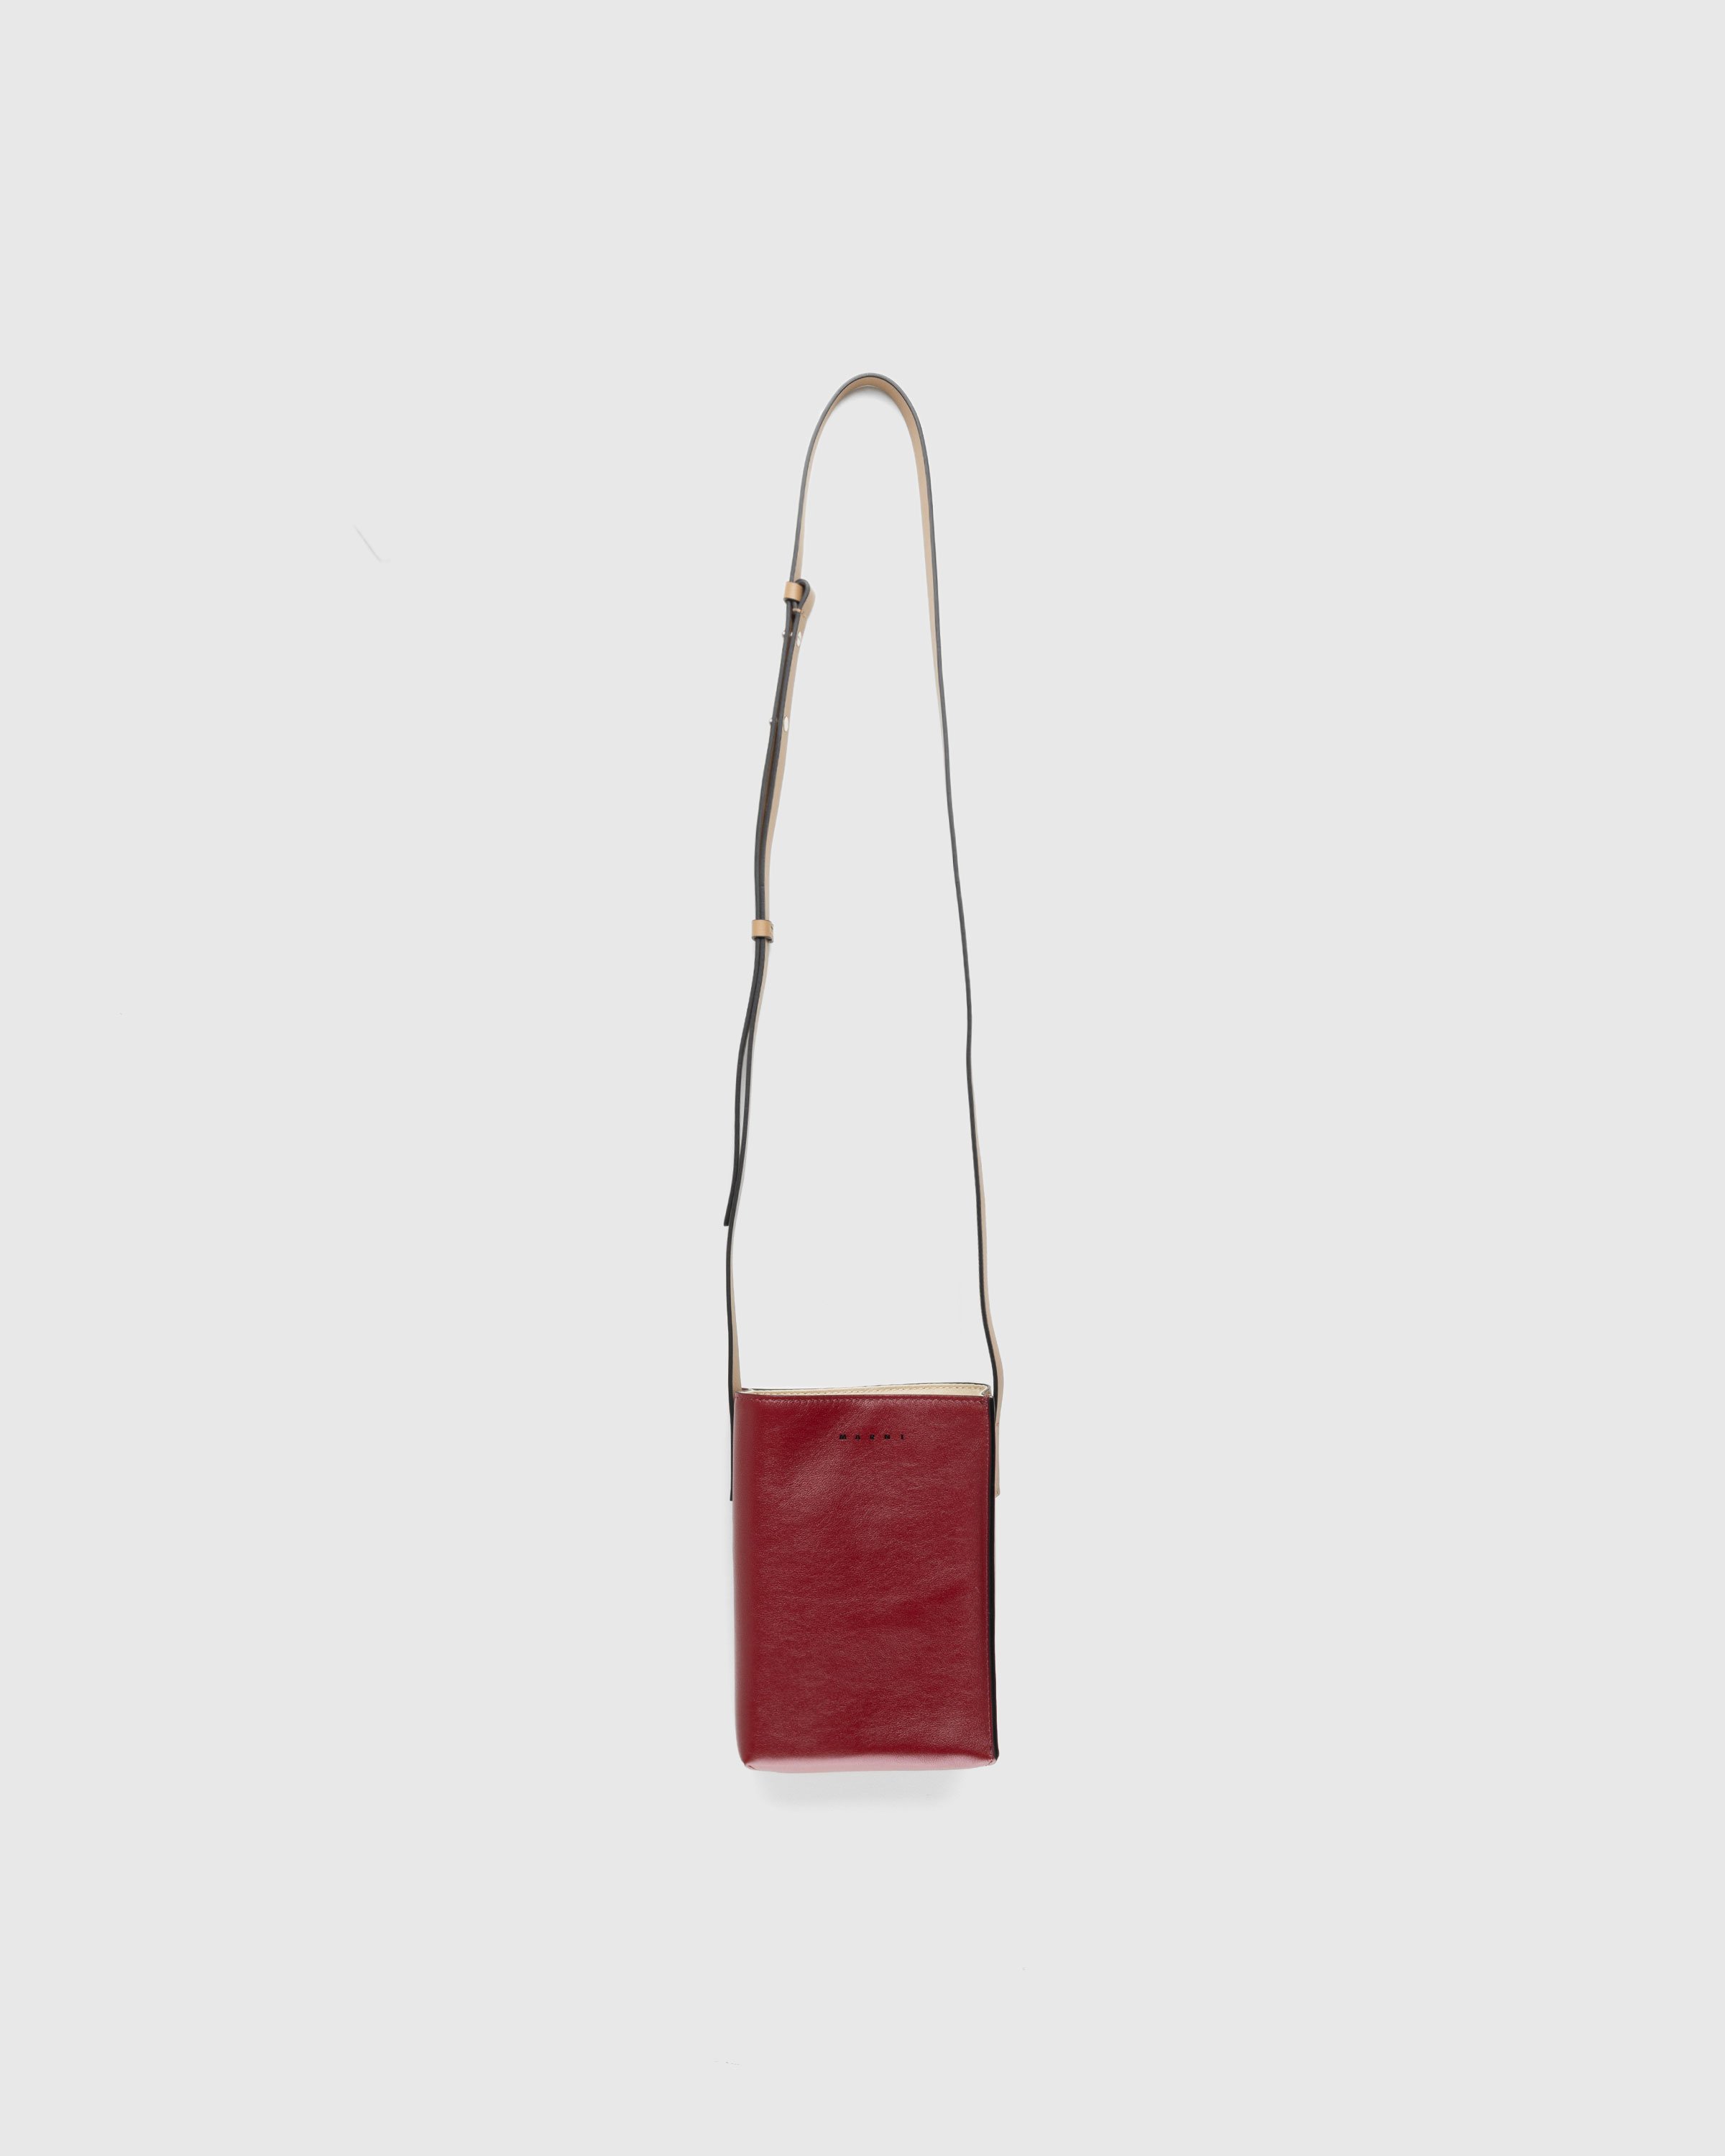 Marni - Museo Nano Bag Red/Beige - Accessories - Red - Image 1